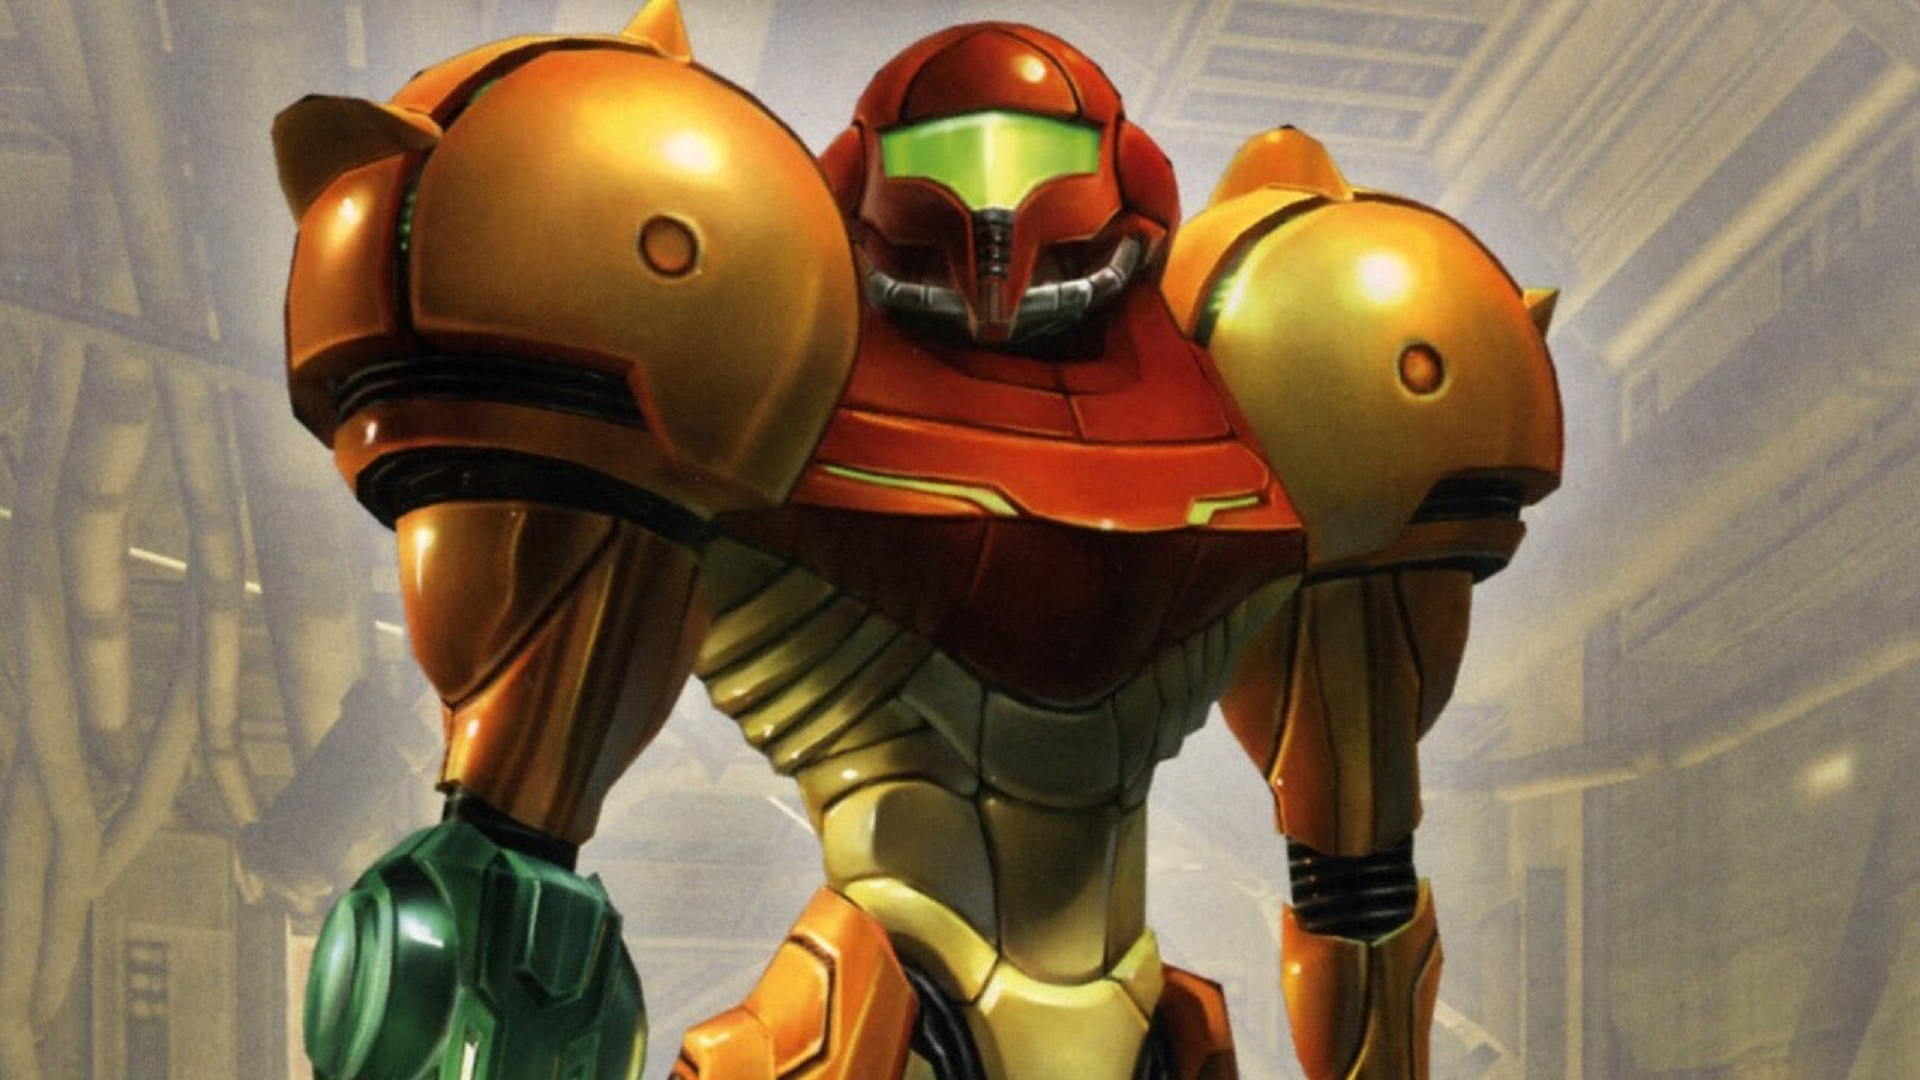 Metroid Prime Remaster is ‘Definitively’ One of Nintendo’s Big Holiday Games – Rumor